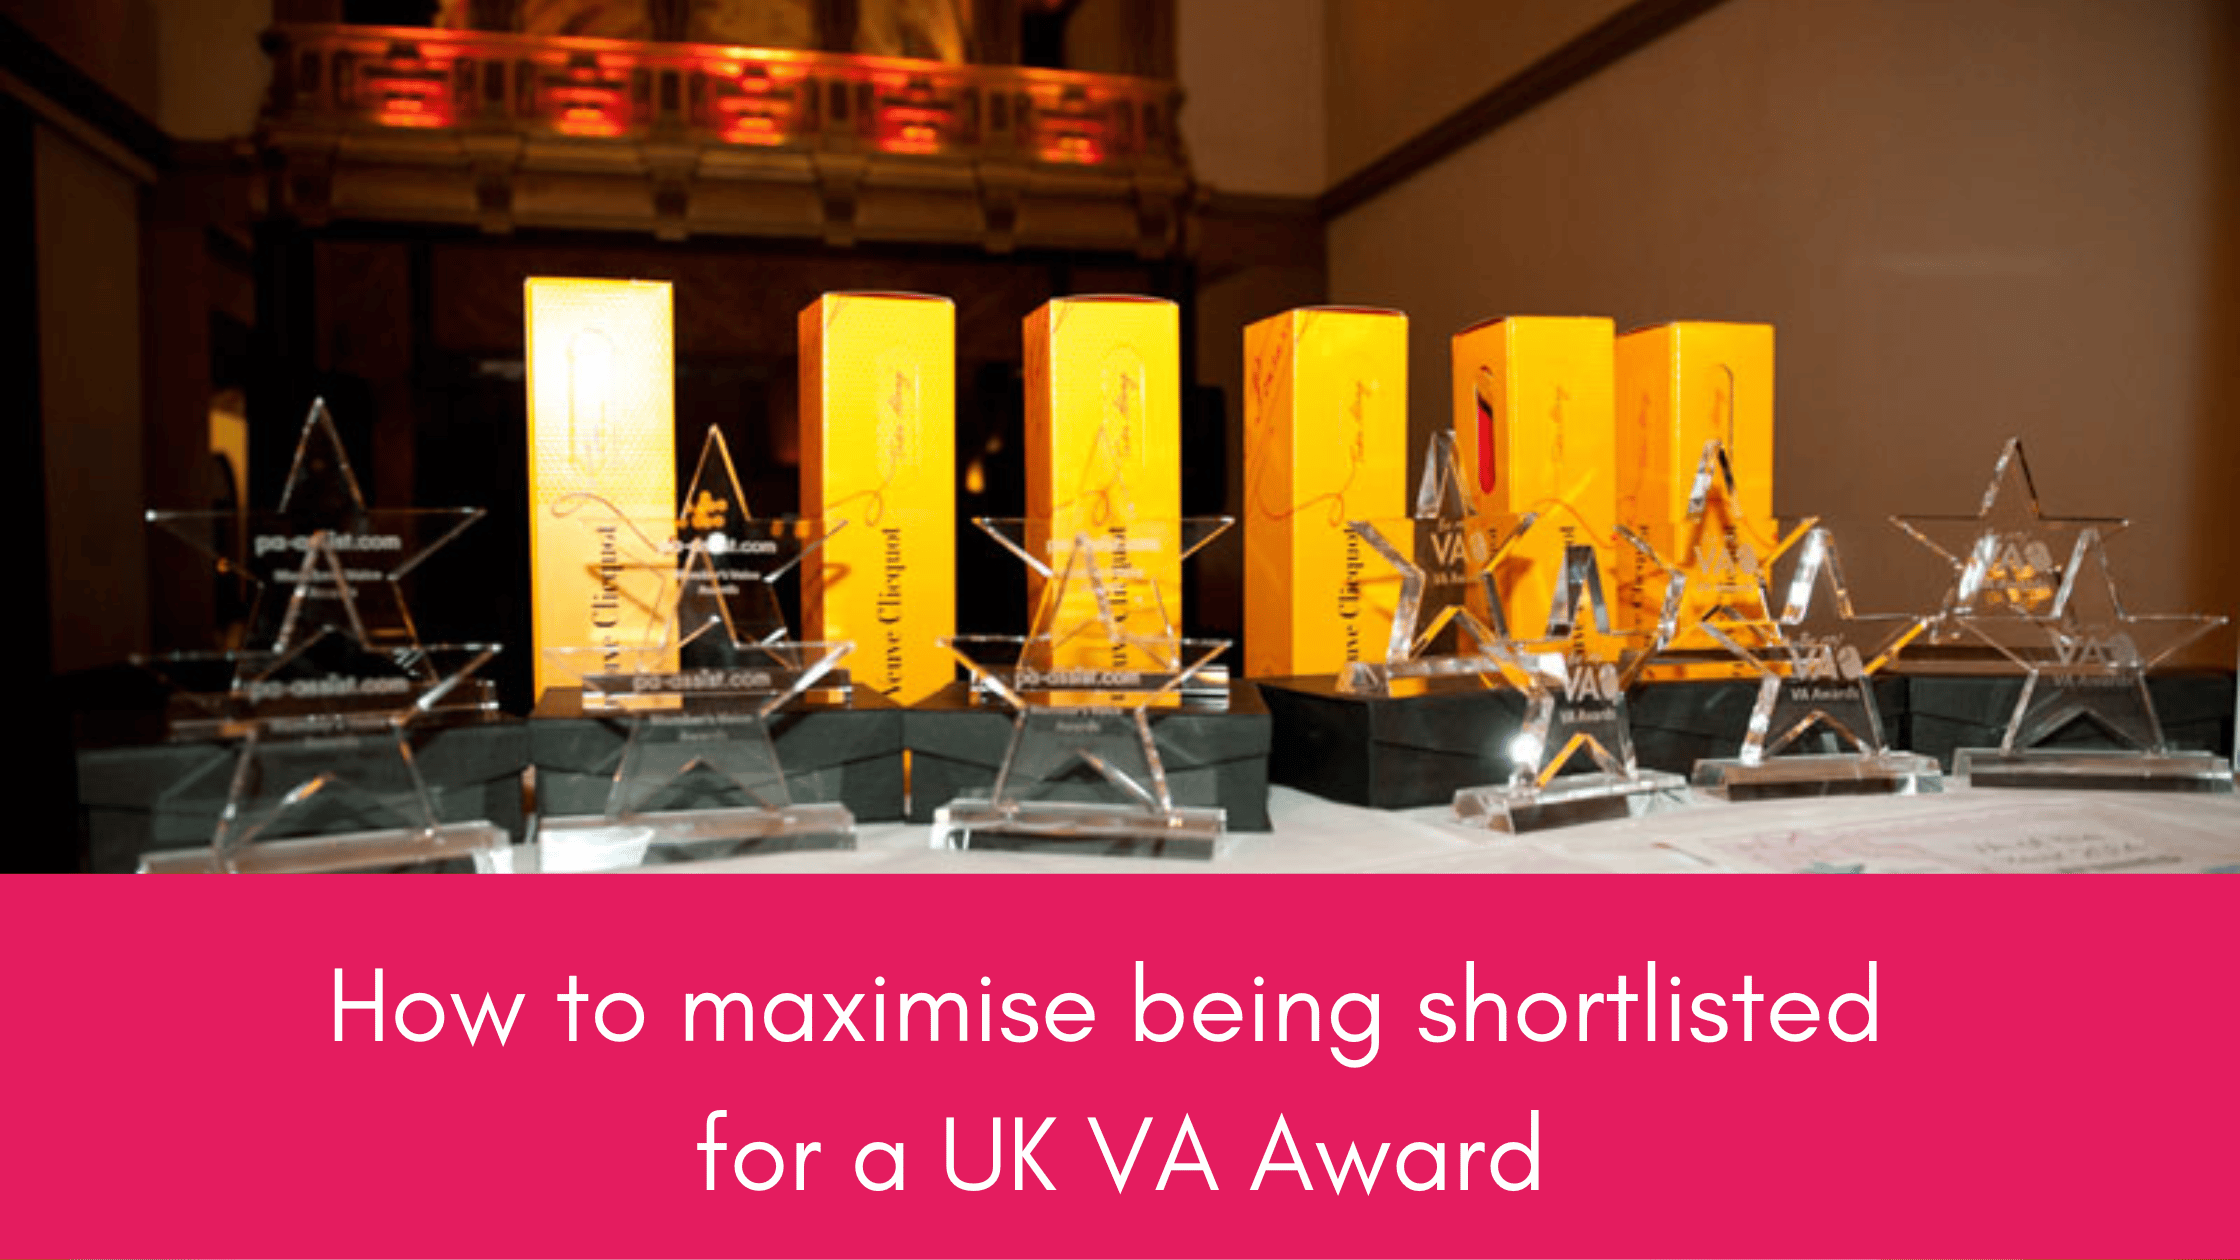 How to maximise being shortlisted for a UK VA Award